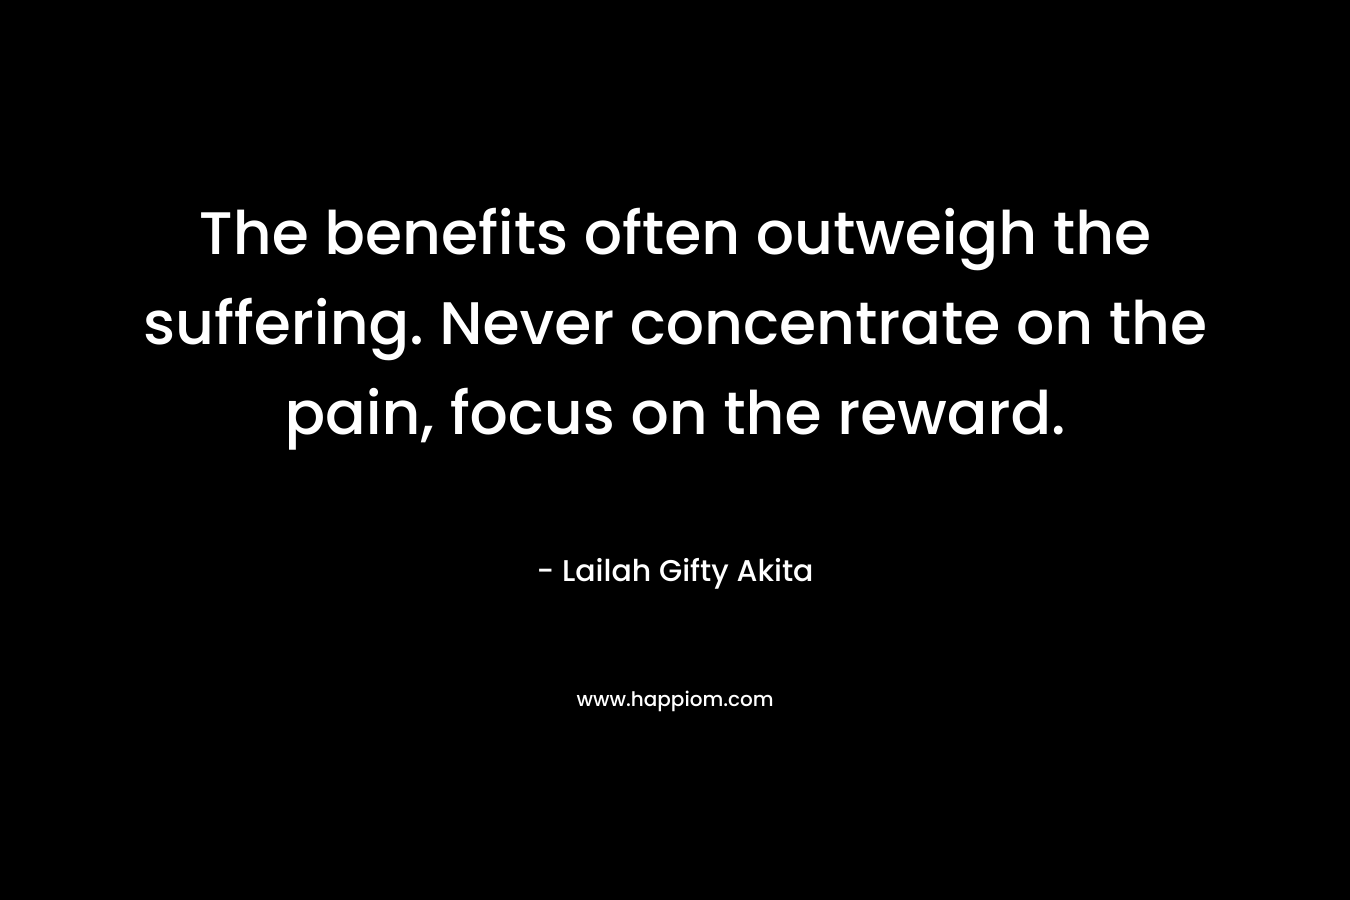 The benefits often outweigh the suffering. Never concentrate on the pain, focus on the reward.